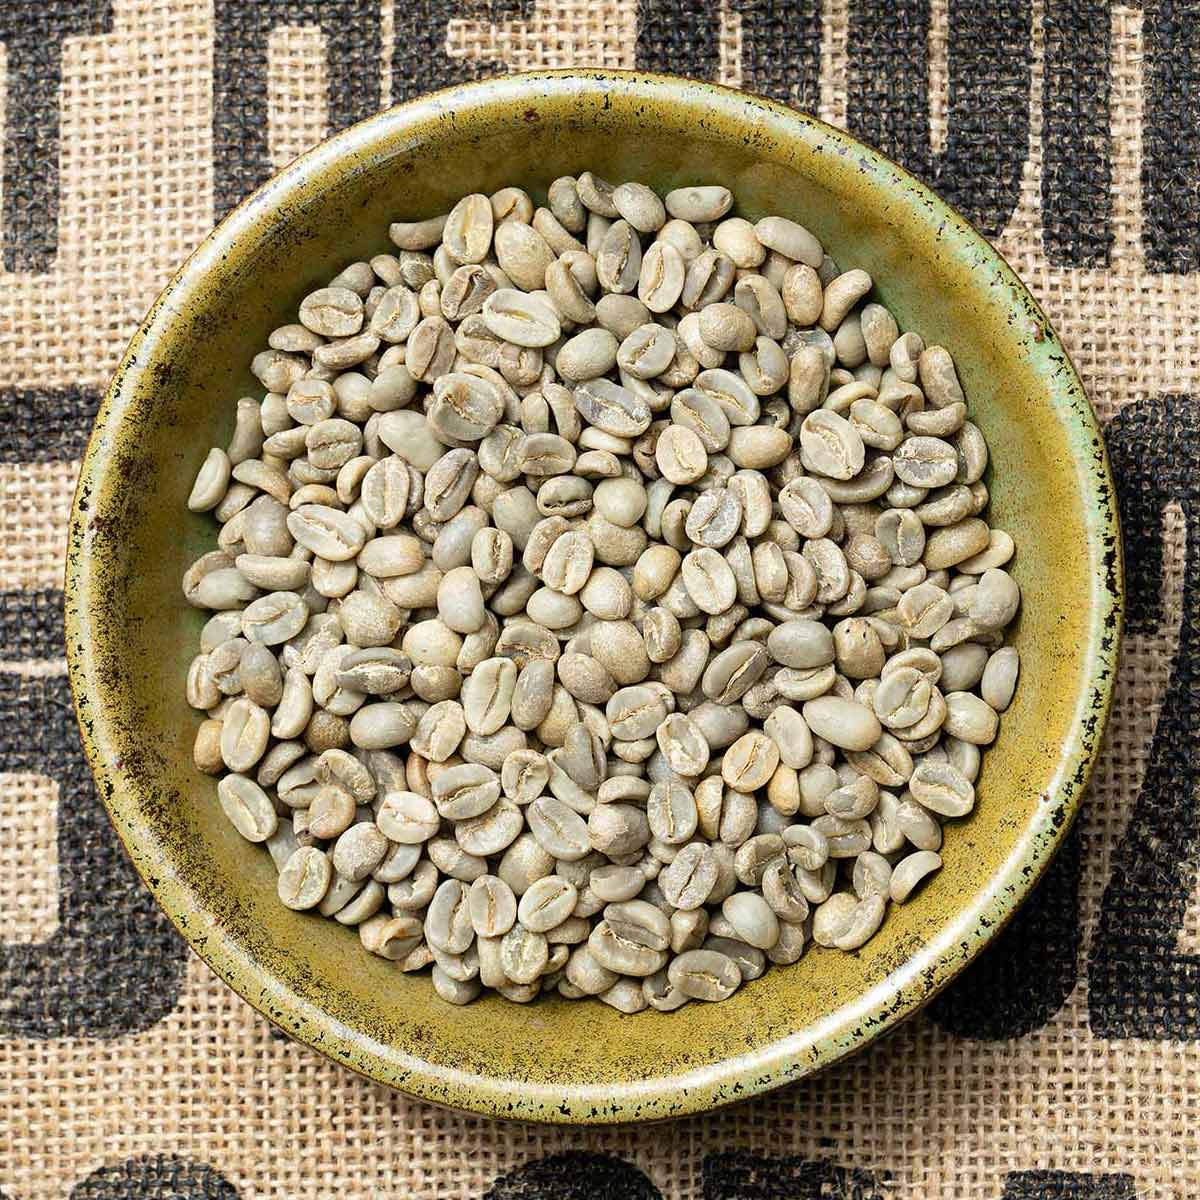 raw green coffee beans in a bowl atop a burlap bag